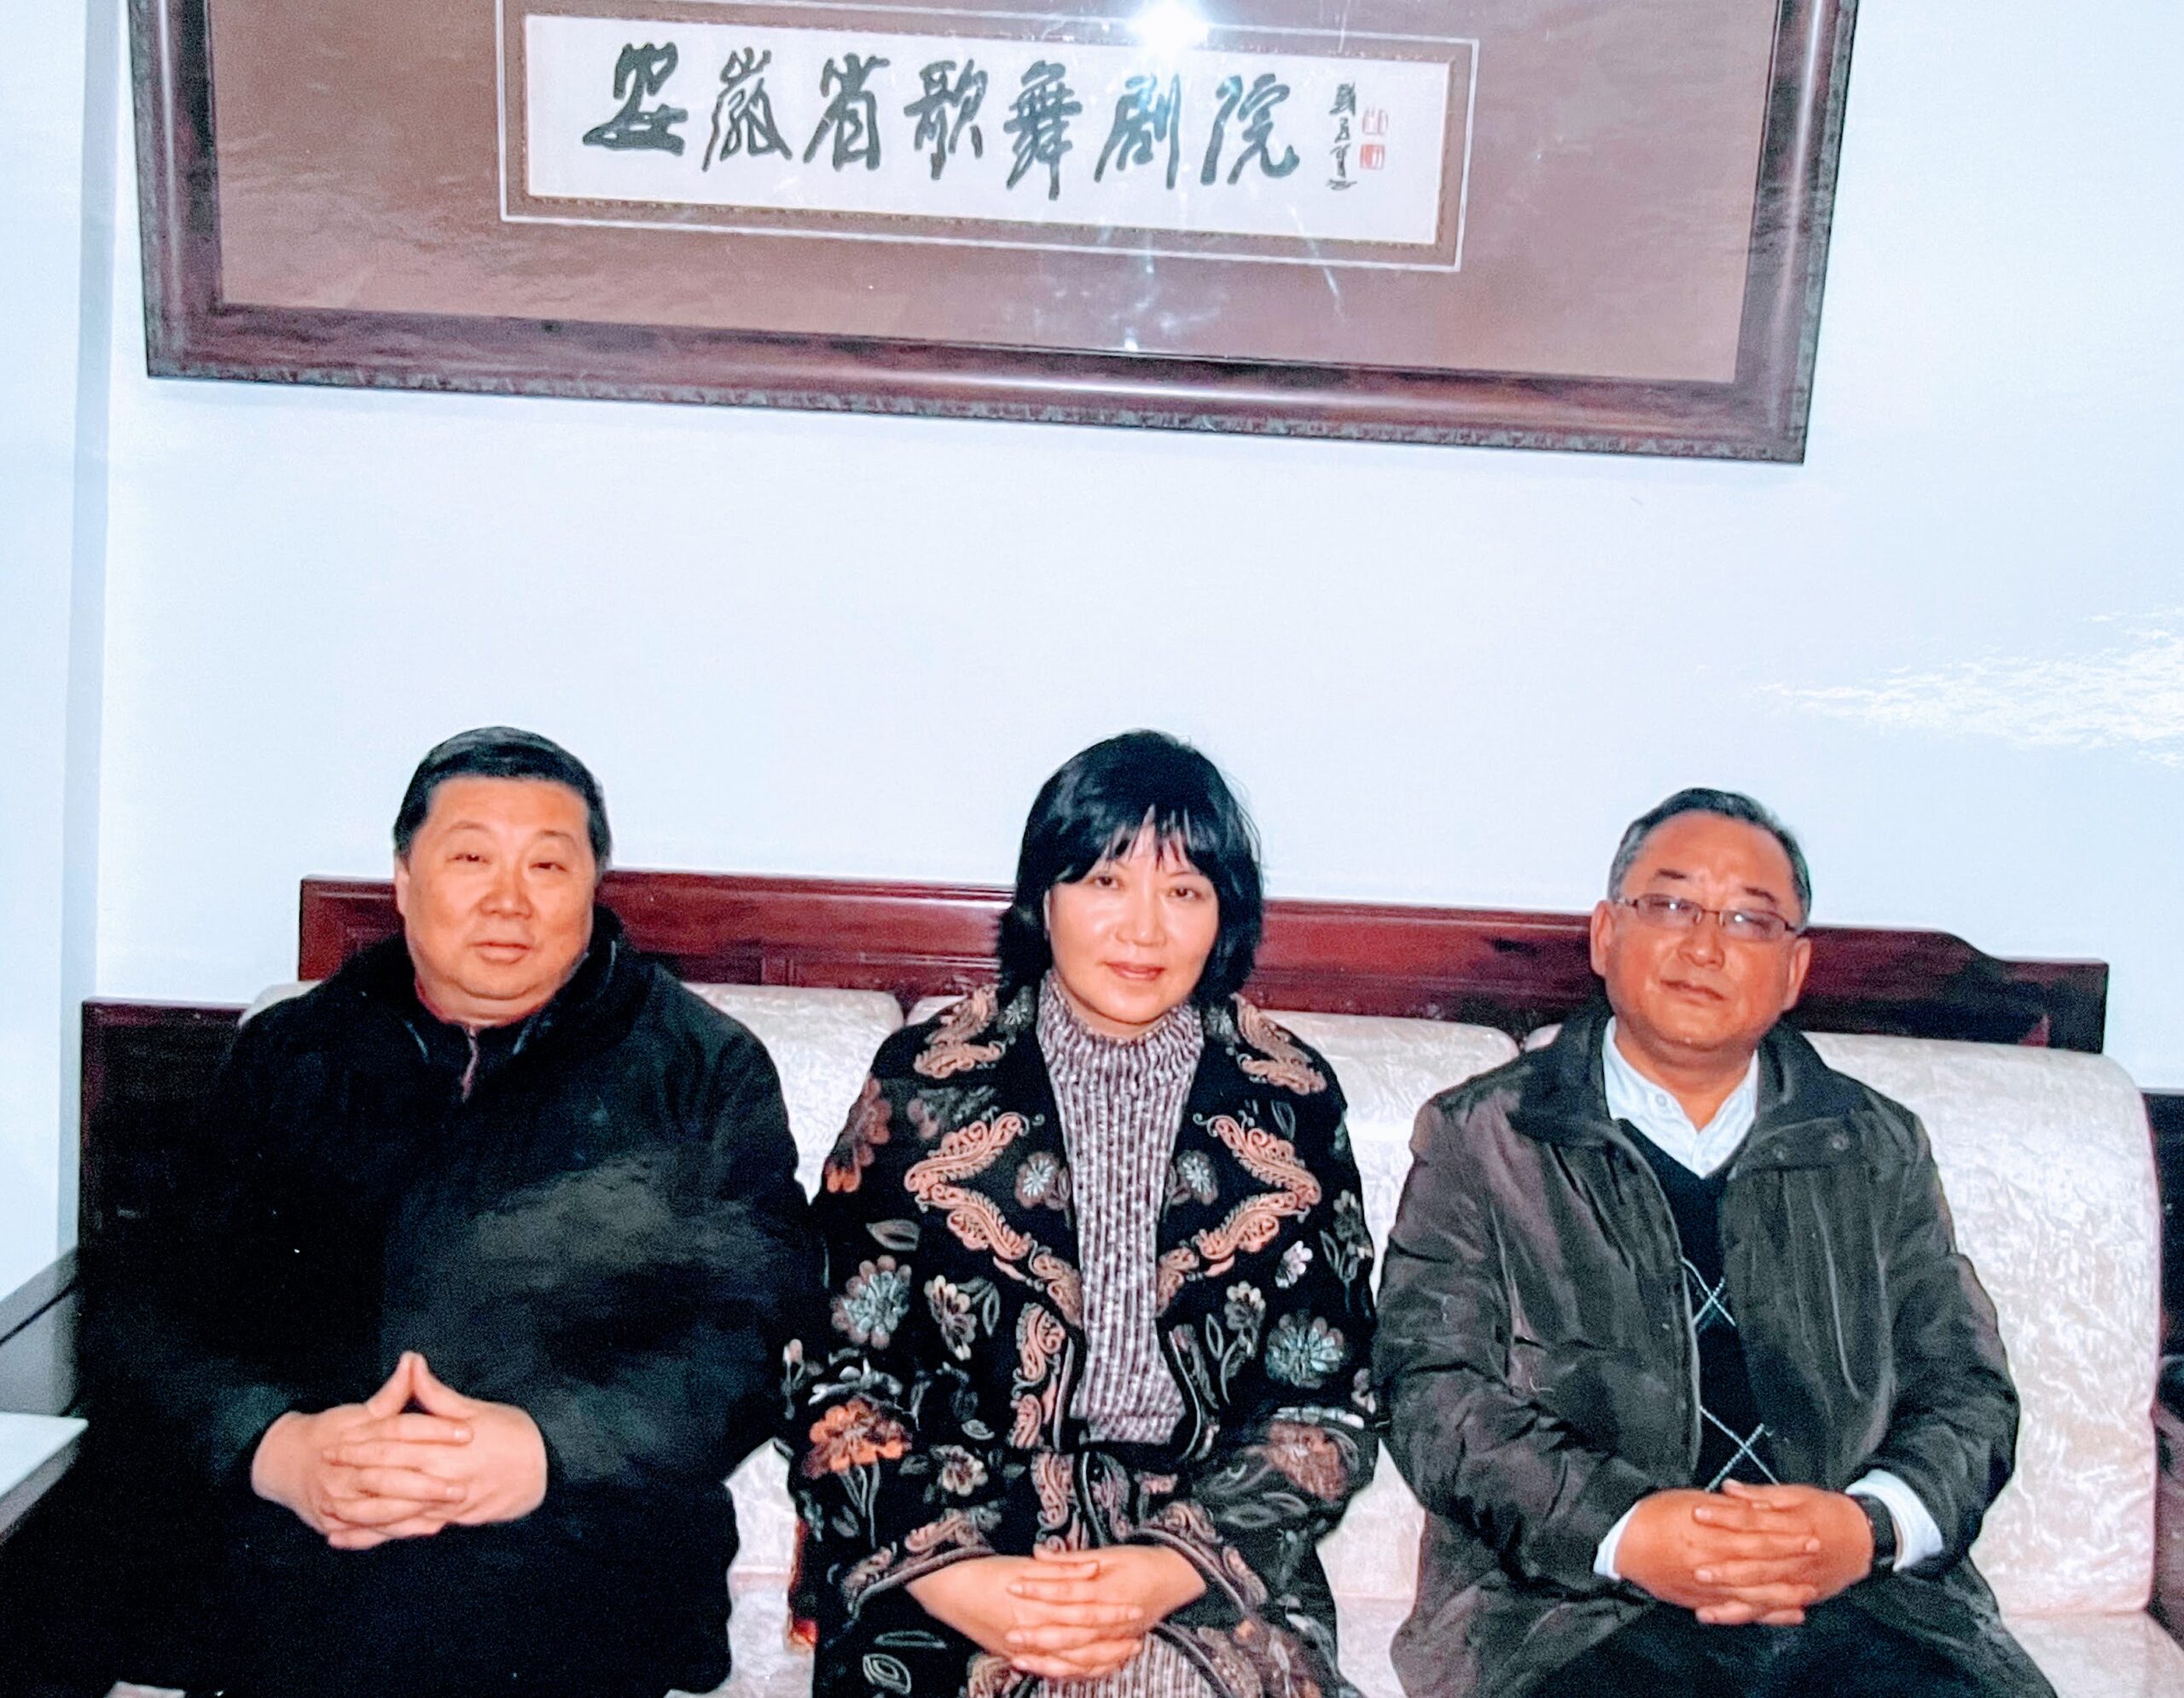 Meeting Anhui Song and Dance Institution leaders